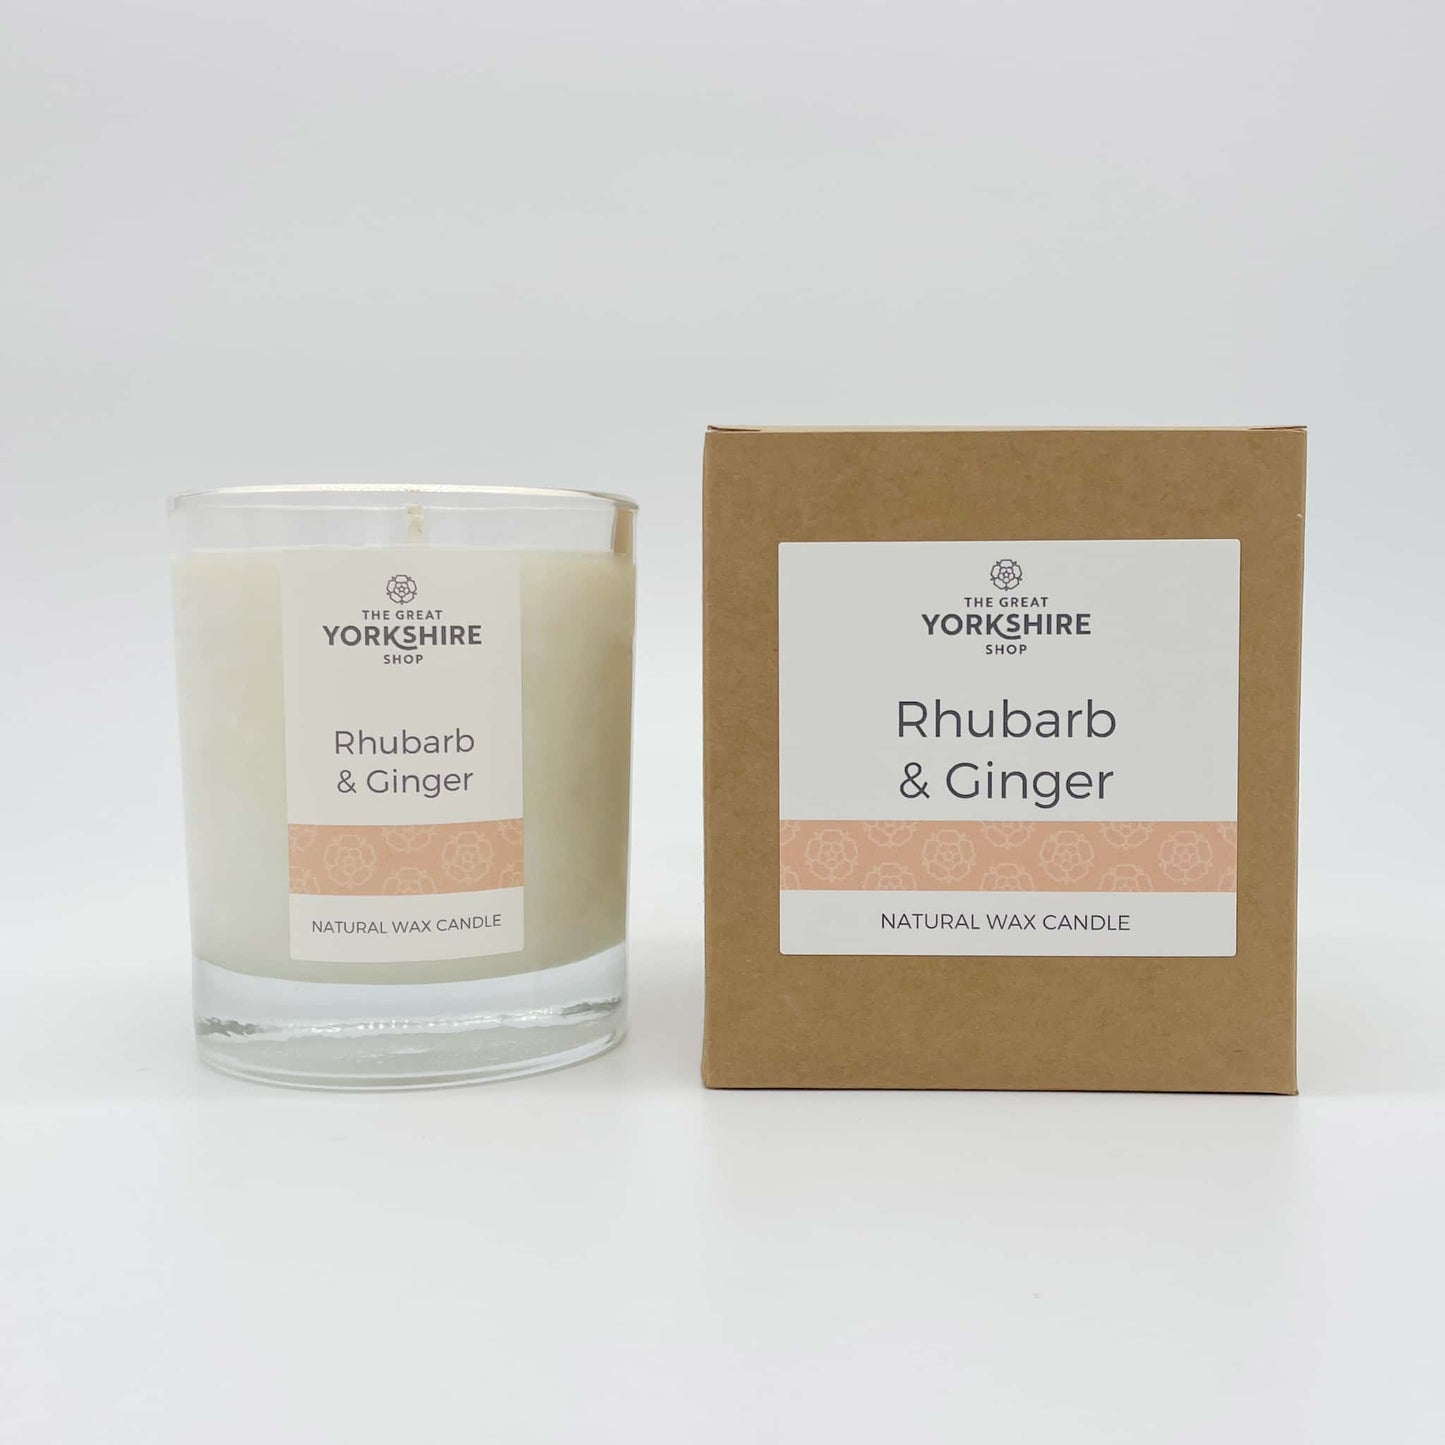 Rhubarb & Ginger Natural Wax Candle - The Great Yorkshire Shop